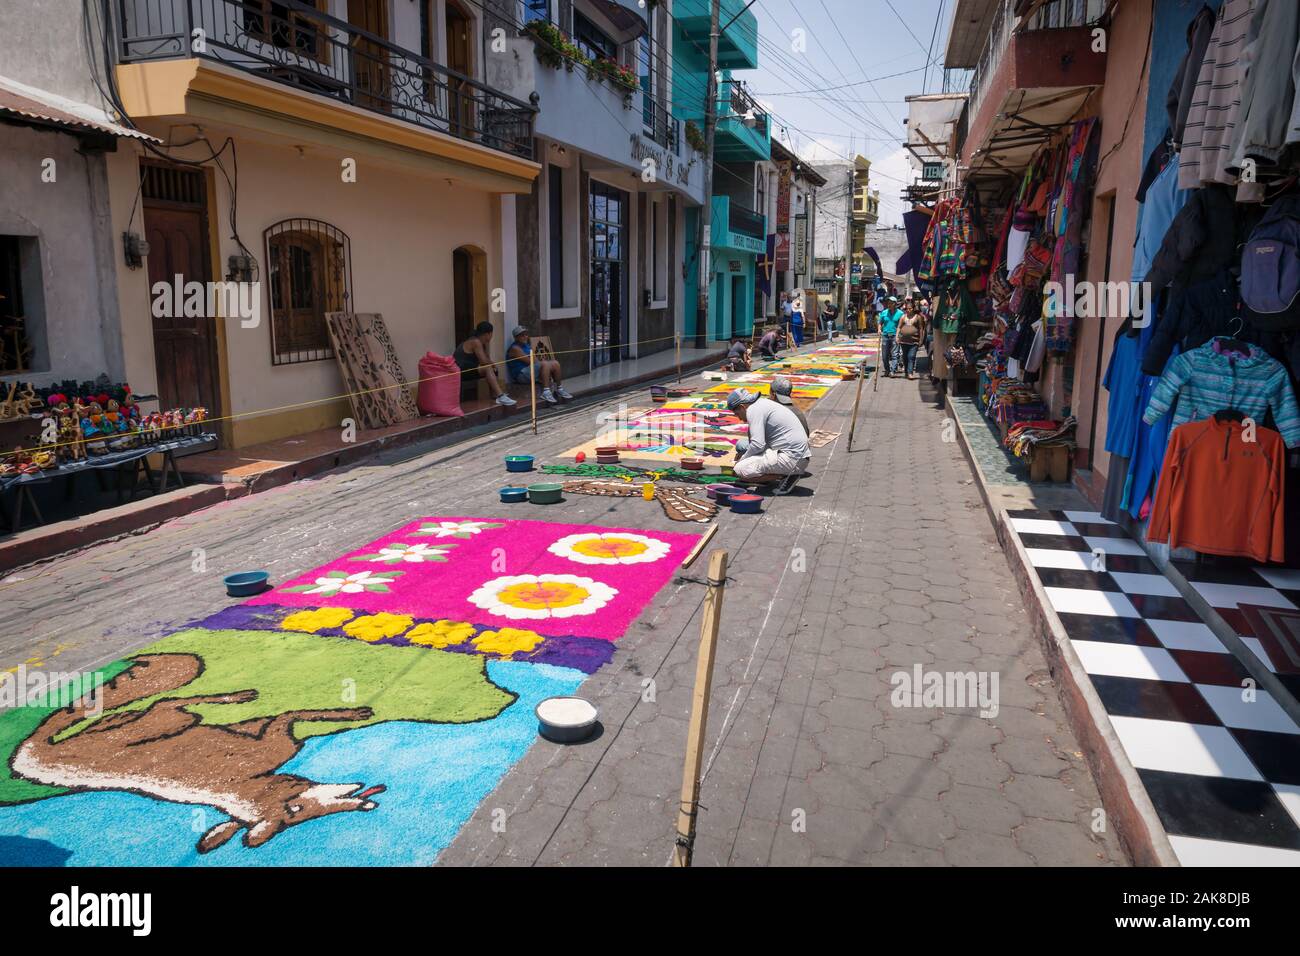 Santiago Atitlan, Guatemala - 30 March 2018: Local people making alfombra, colorful sawdust carpets for Semana Santa, Easter on the shopping street Stock Photo